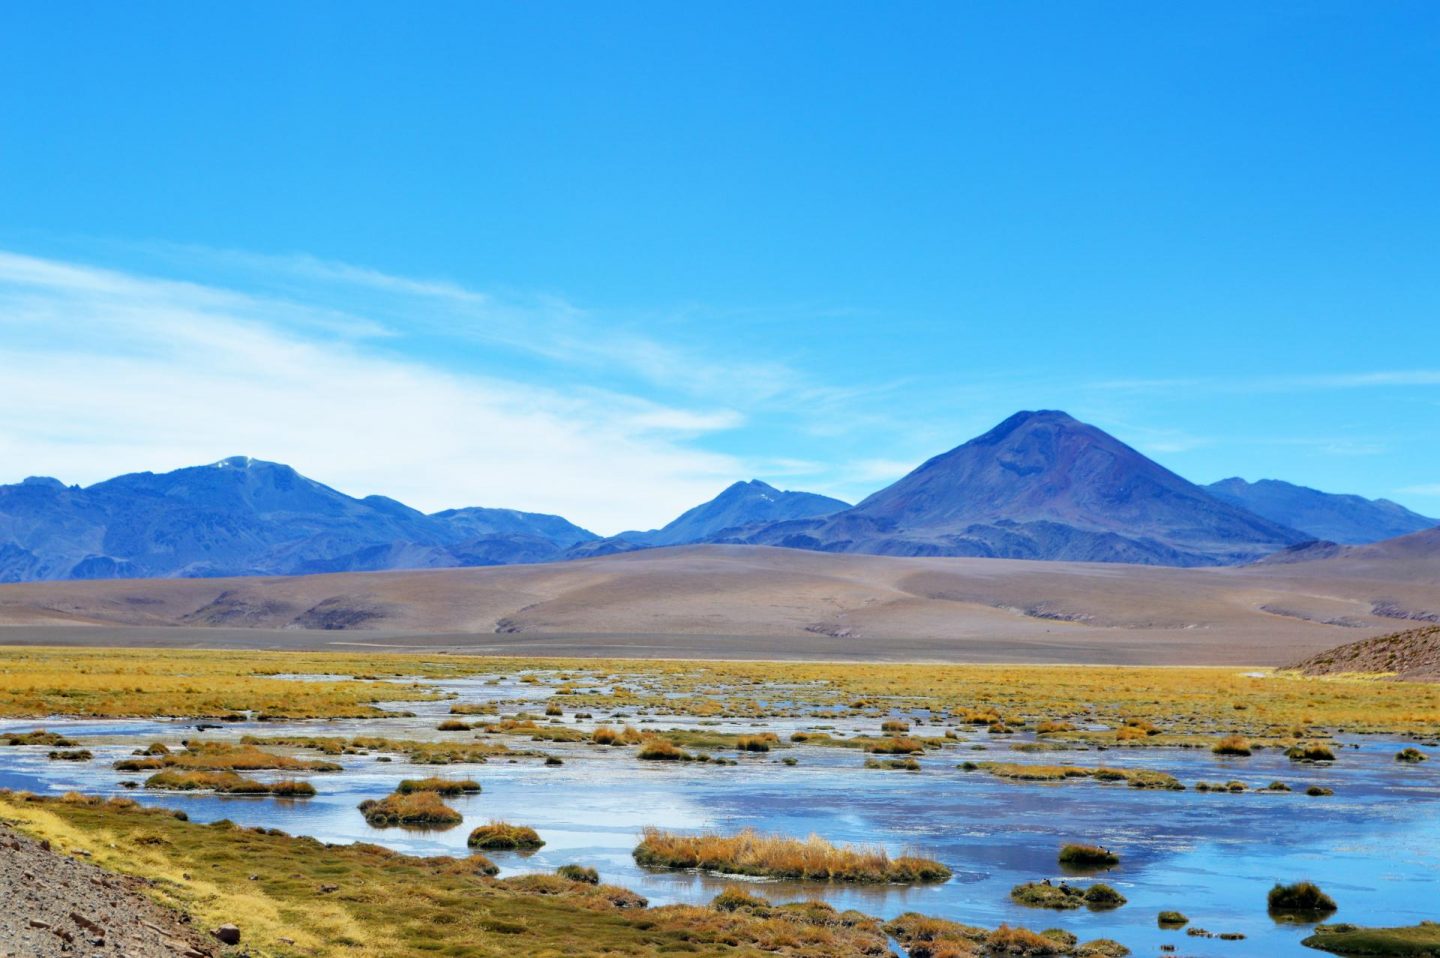 Adventures In The Atacama Desert | Top 10 Things To Do In Atacama Chile | By Sian Lewis, The Girl Outdoors